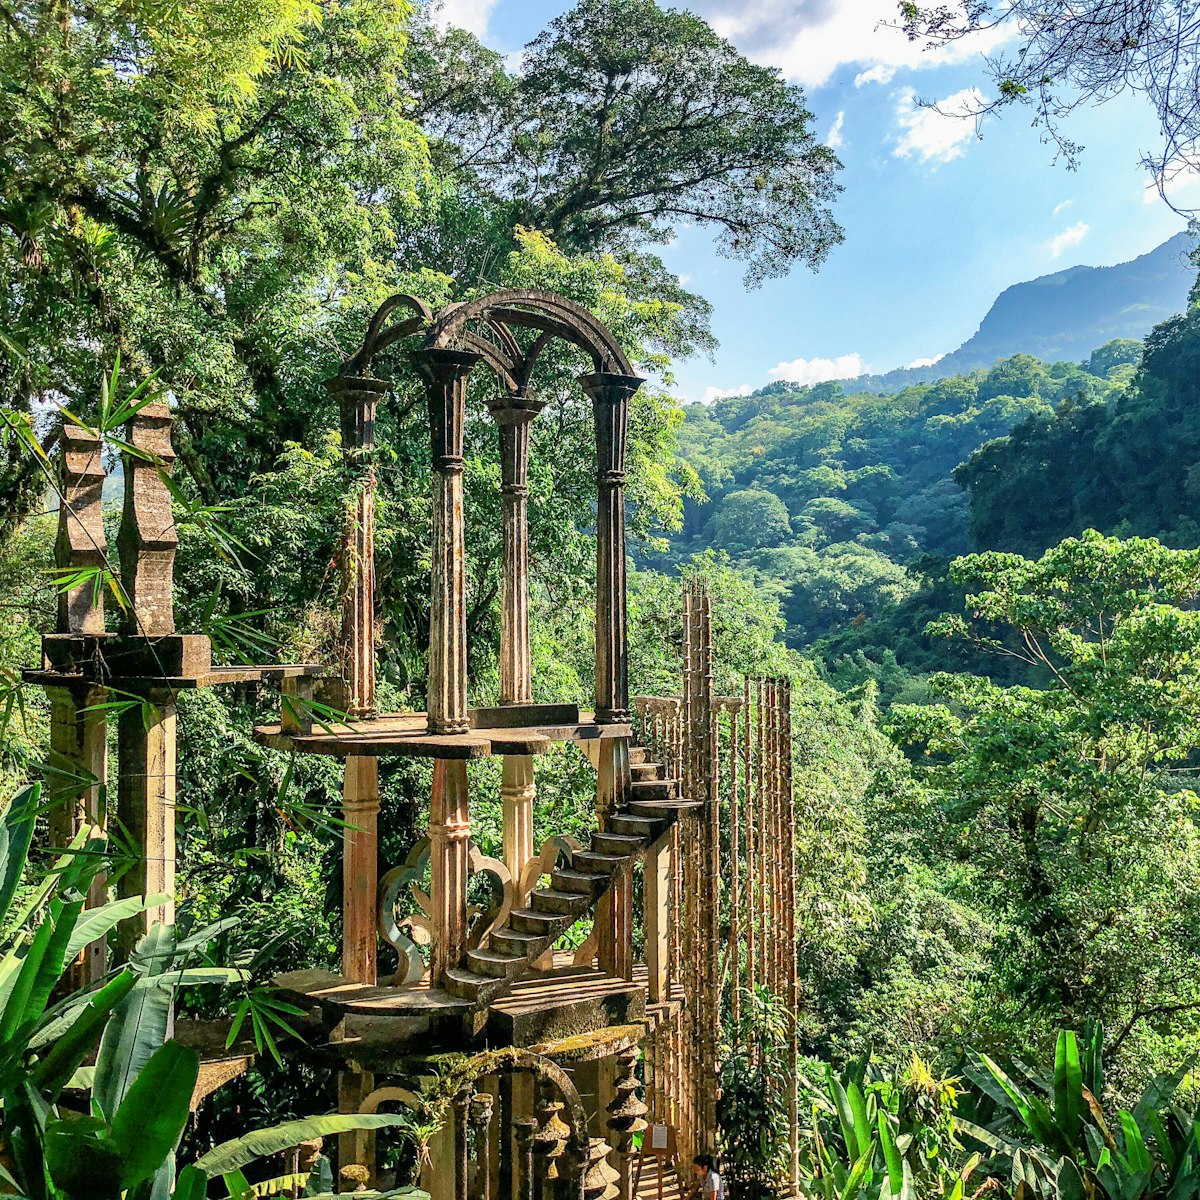 Las Pozas is a surrealistic garden constructed in the middle of a mexican jungle in the city of Xilitla.